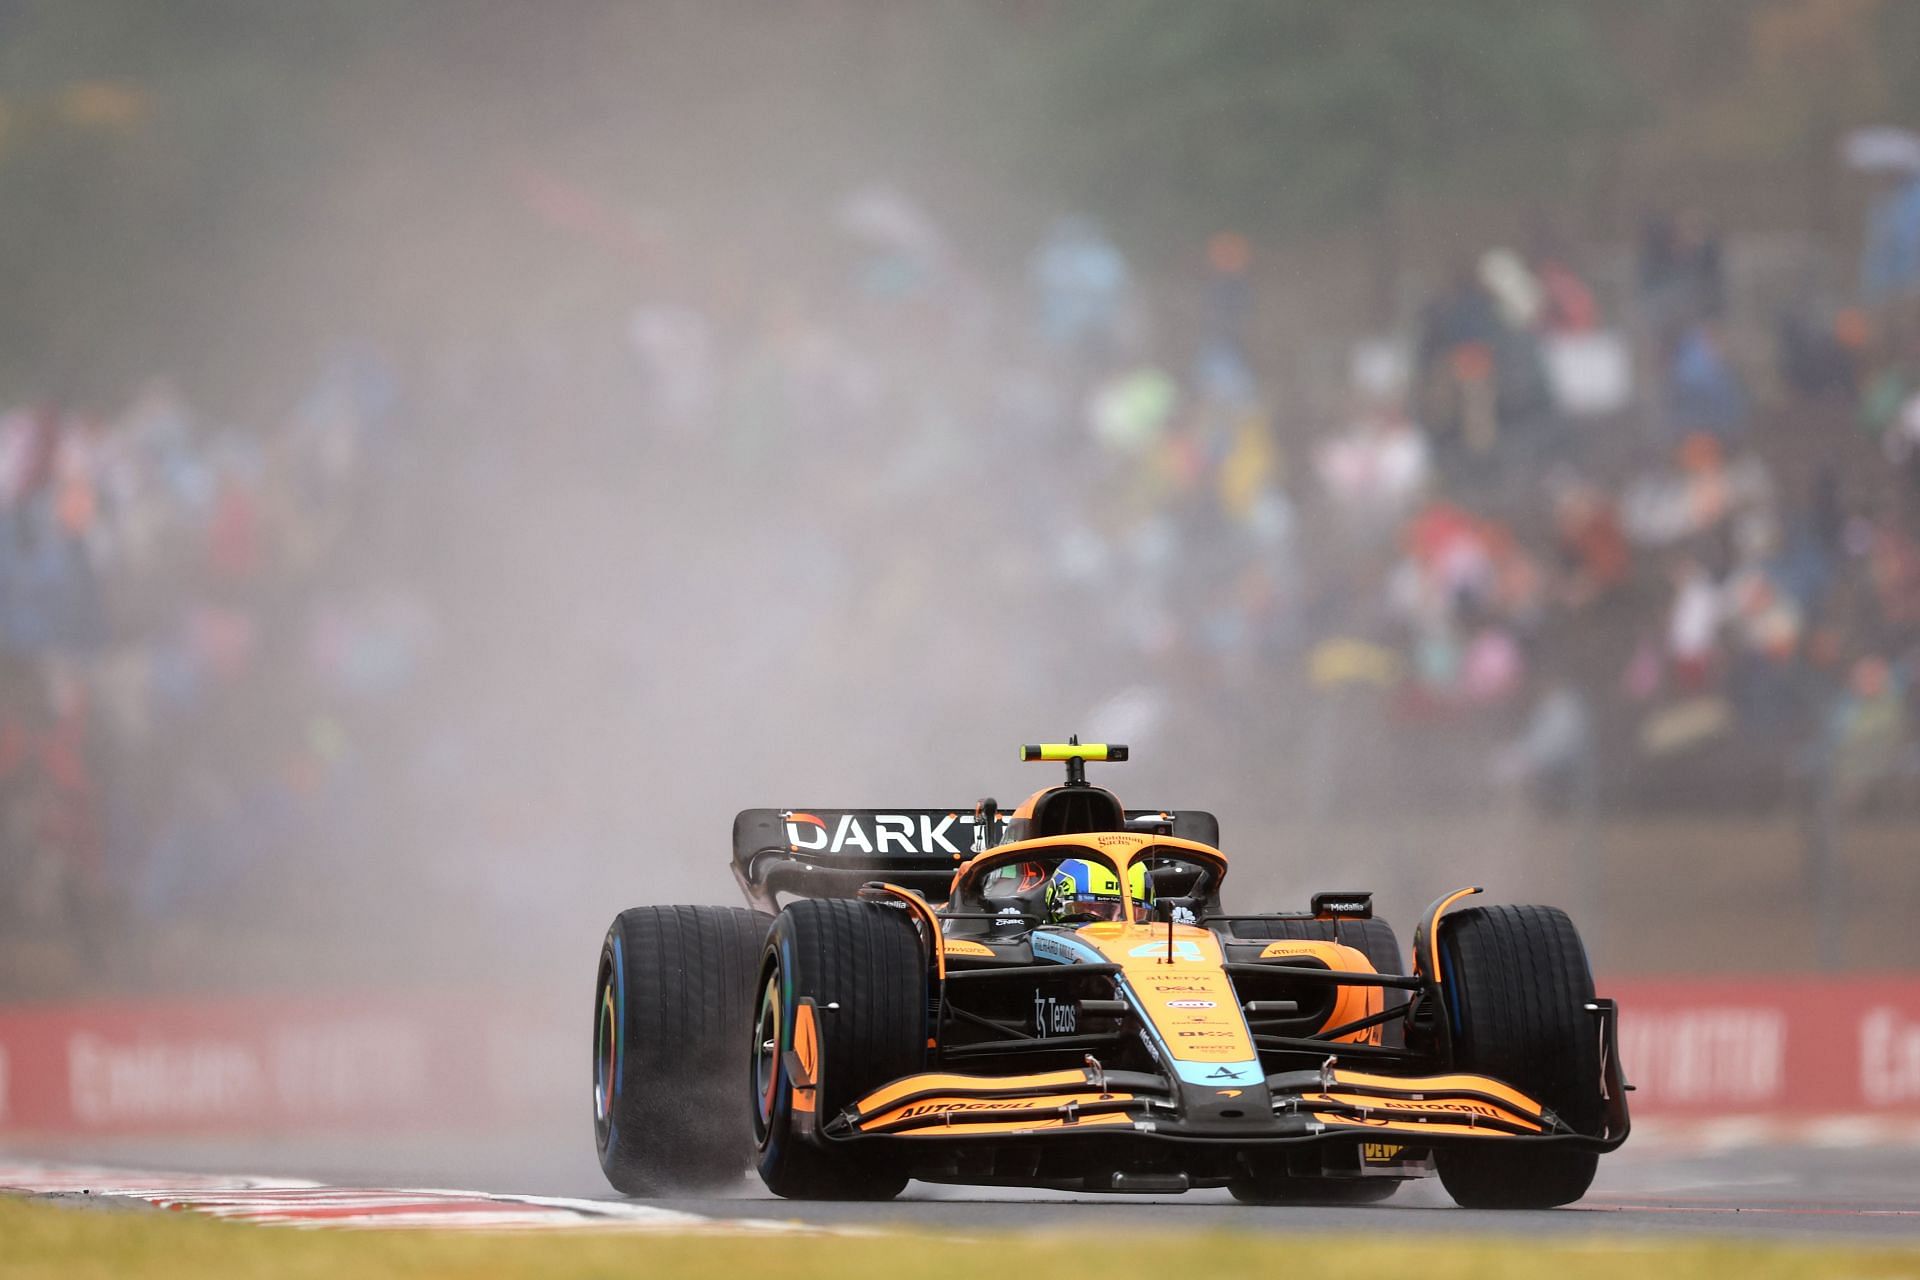 Lando Norris driving the (#4) McLaren MCL36 on track during the F1 Grand Prix of Hungary at Hungaroring on July 31, 2022, in Budapest, Hungary. (Photo by Francois Nel/Getty Images)